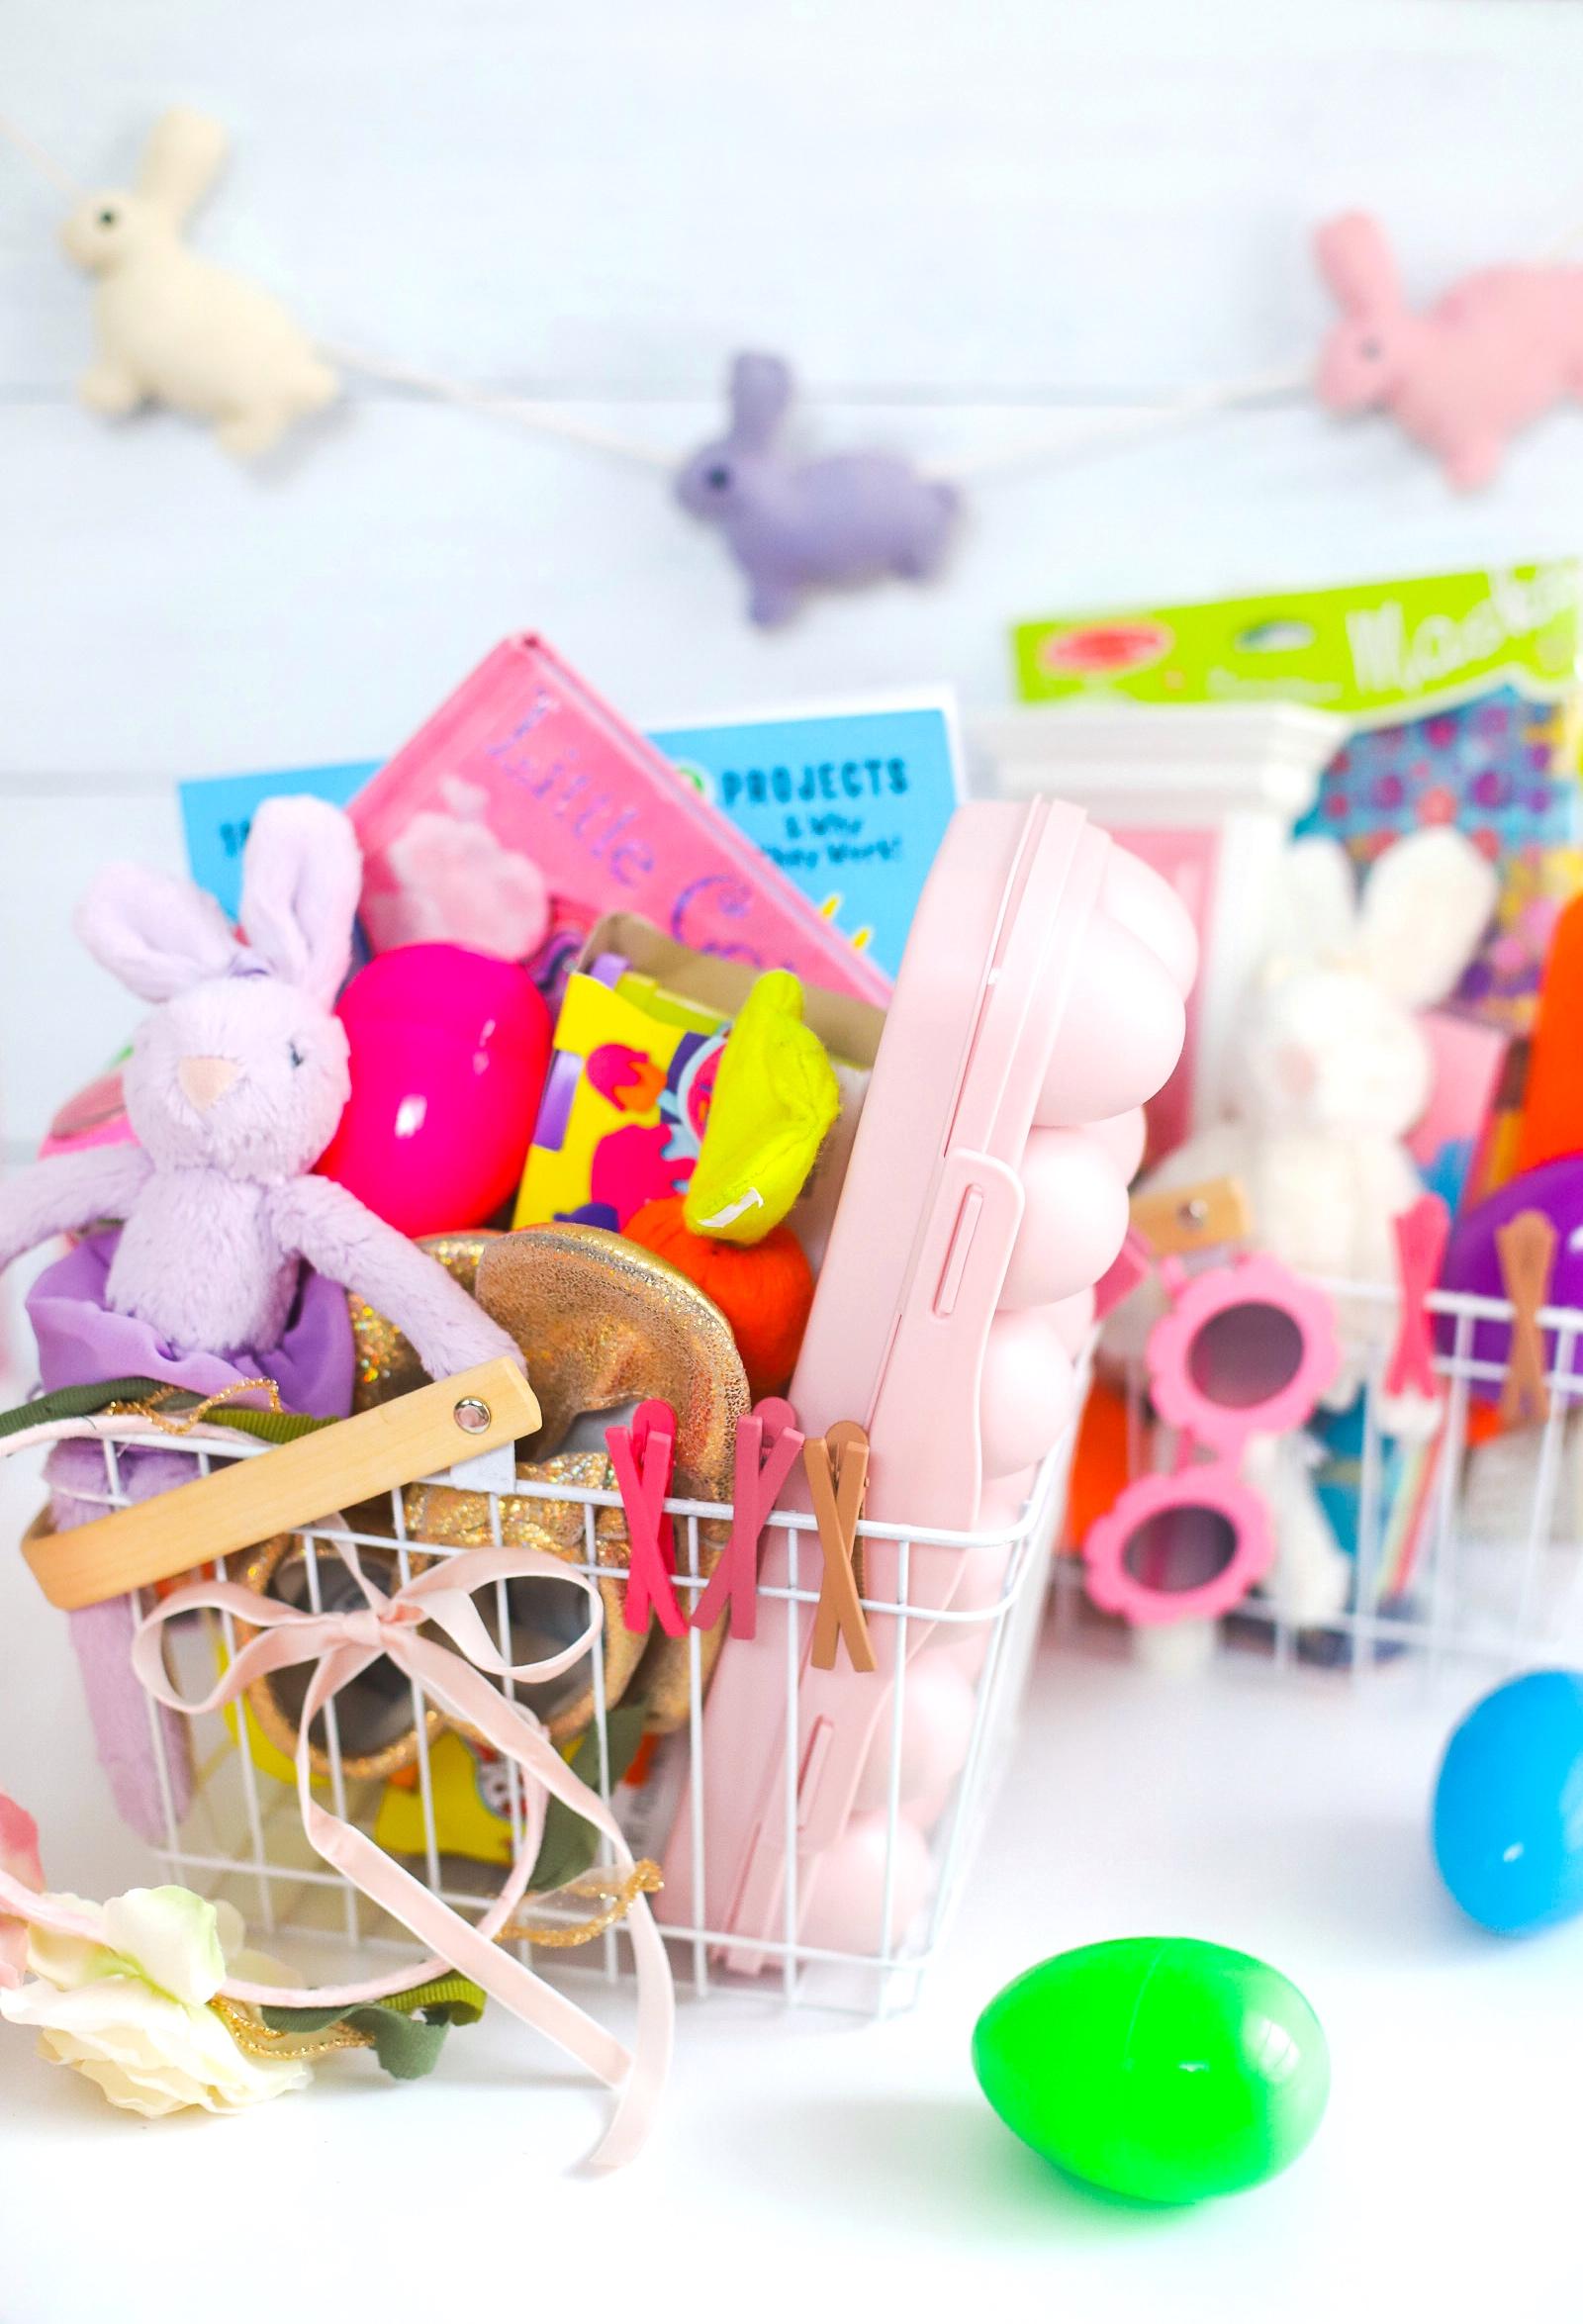 Kids Easter basket with toys, shoes, plastic eggs, and stuffed animal bunnies